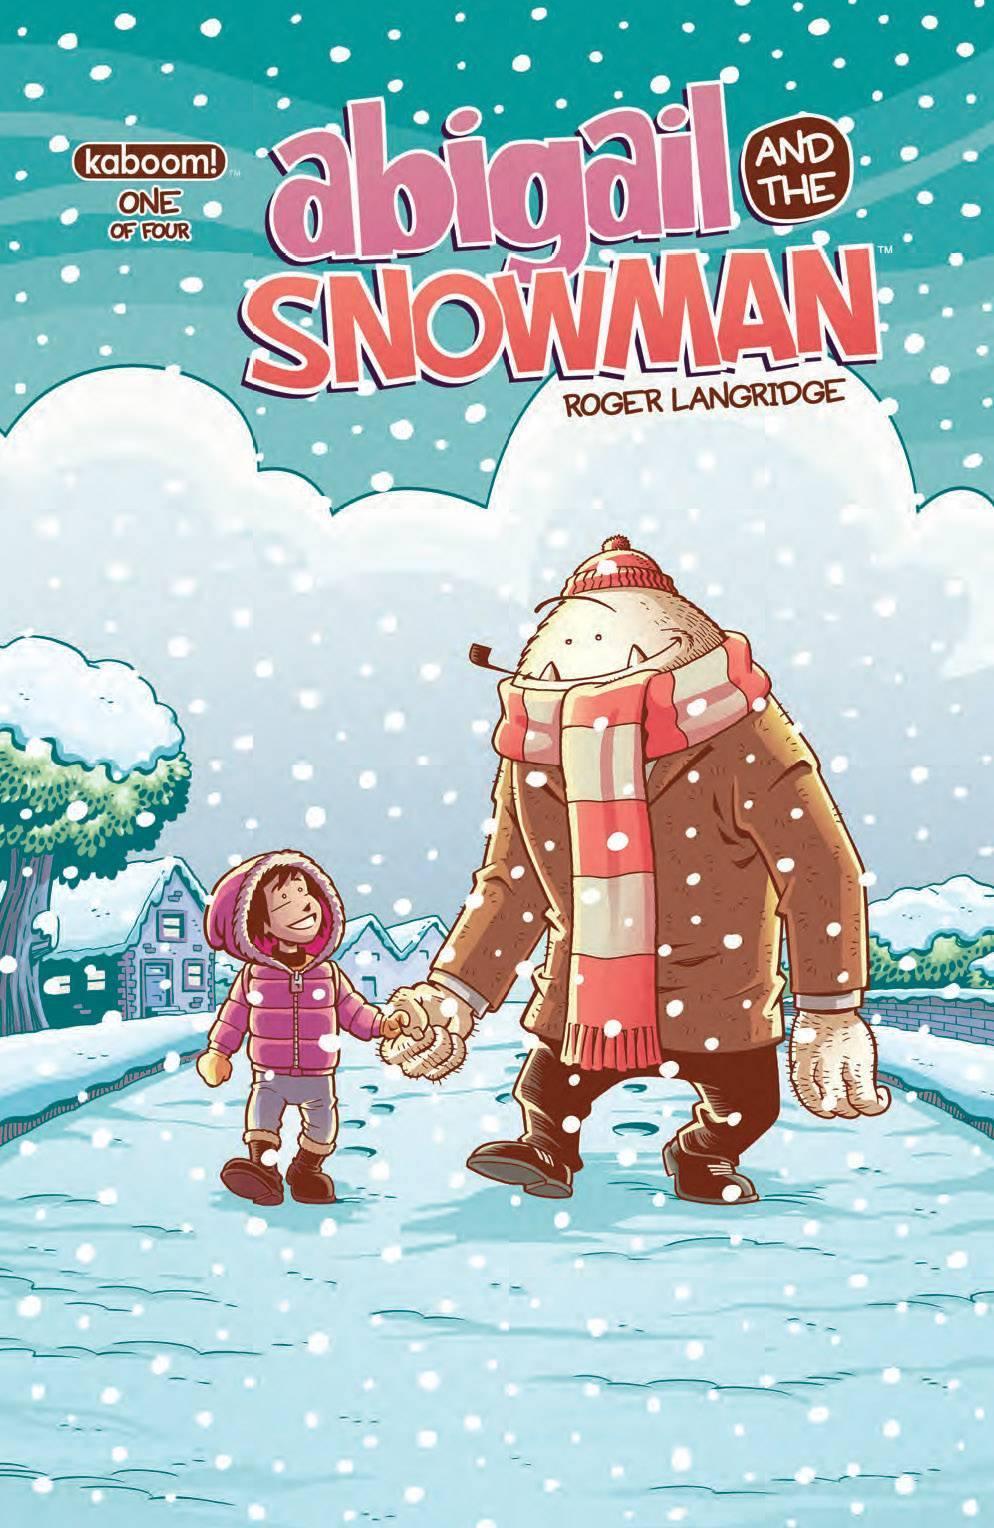 ABIGAIL AND THE SNOWMAN #1 - Kings Comics